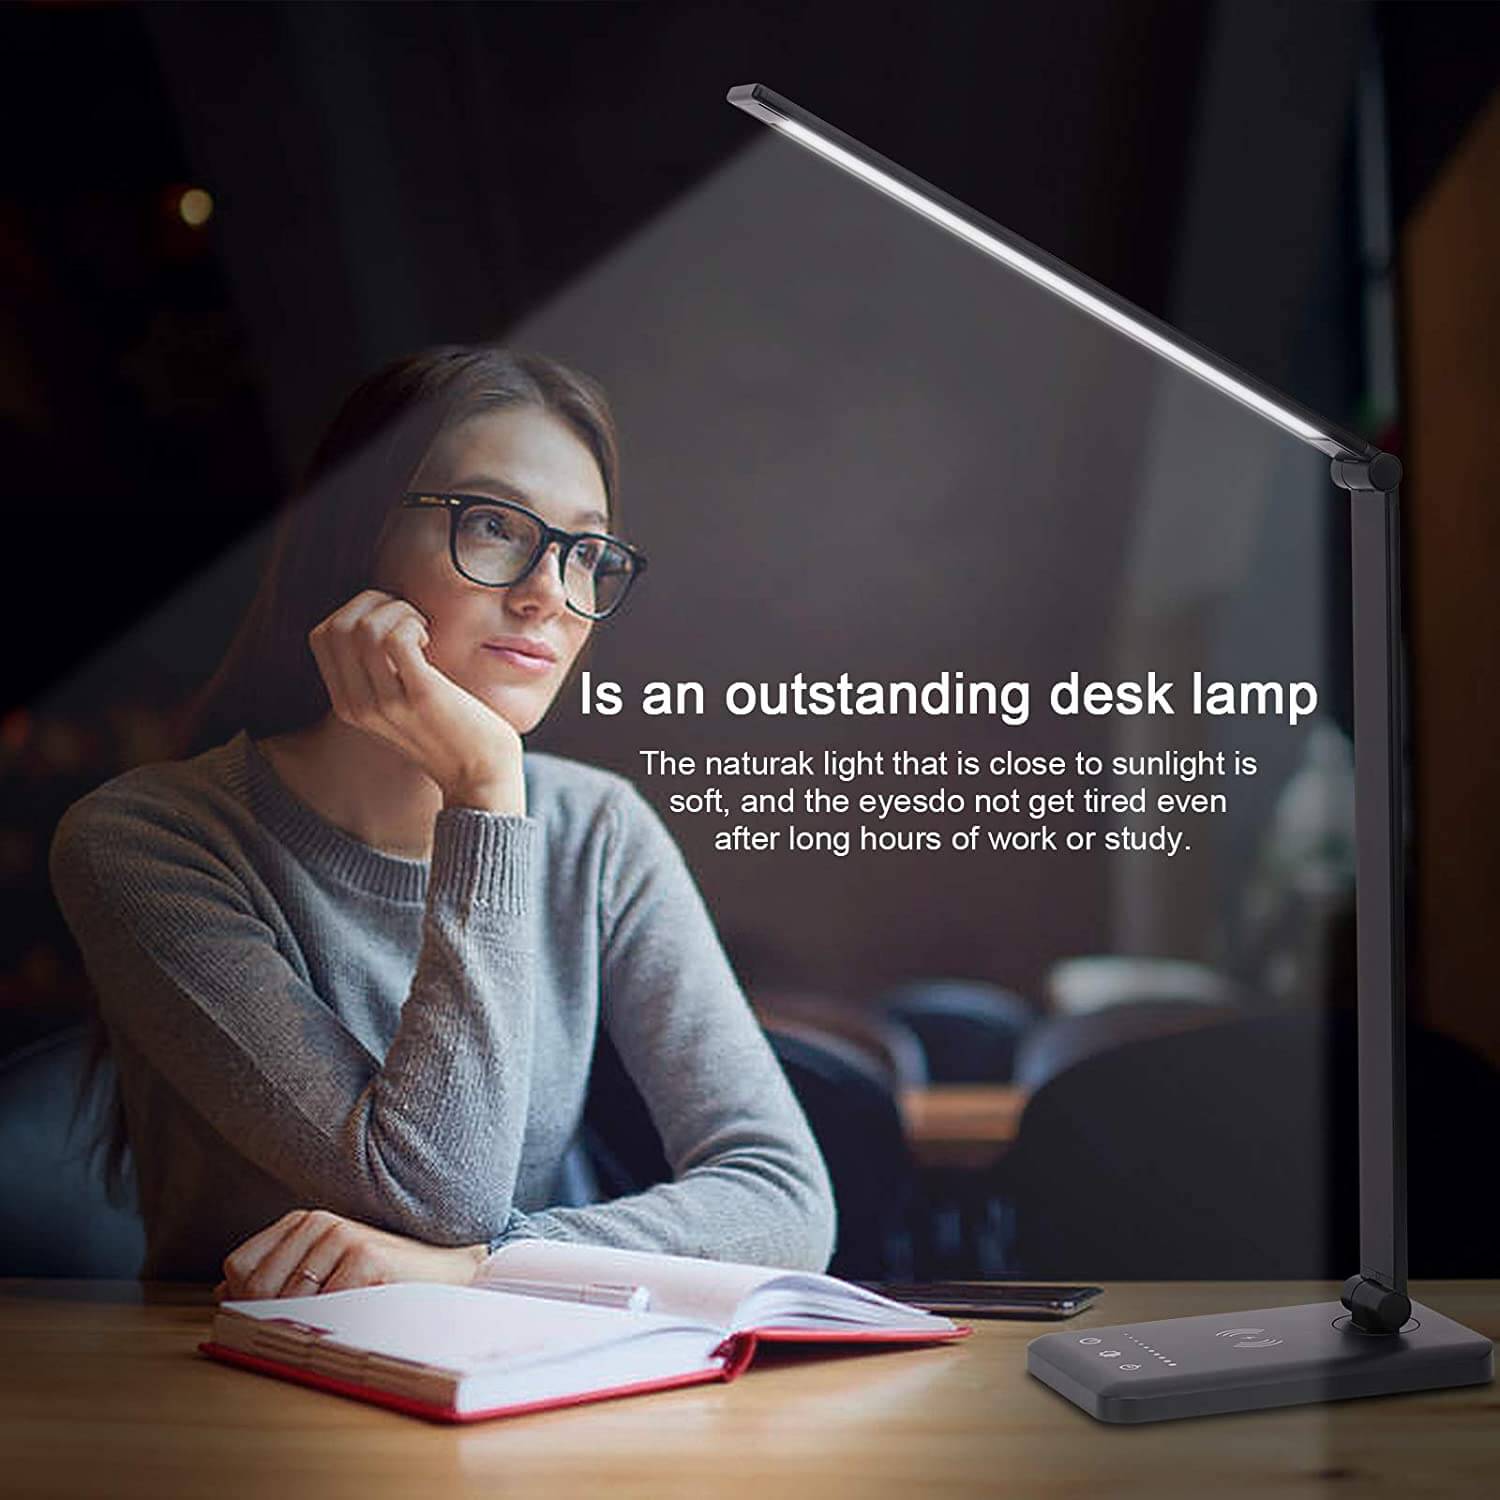 LED Desk Lamp with Wireless Charger - Best LED Desk Lamp with Wireless Charger - LINWEY